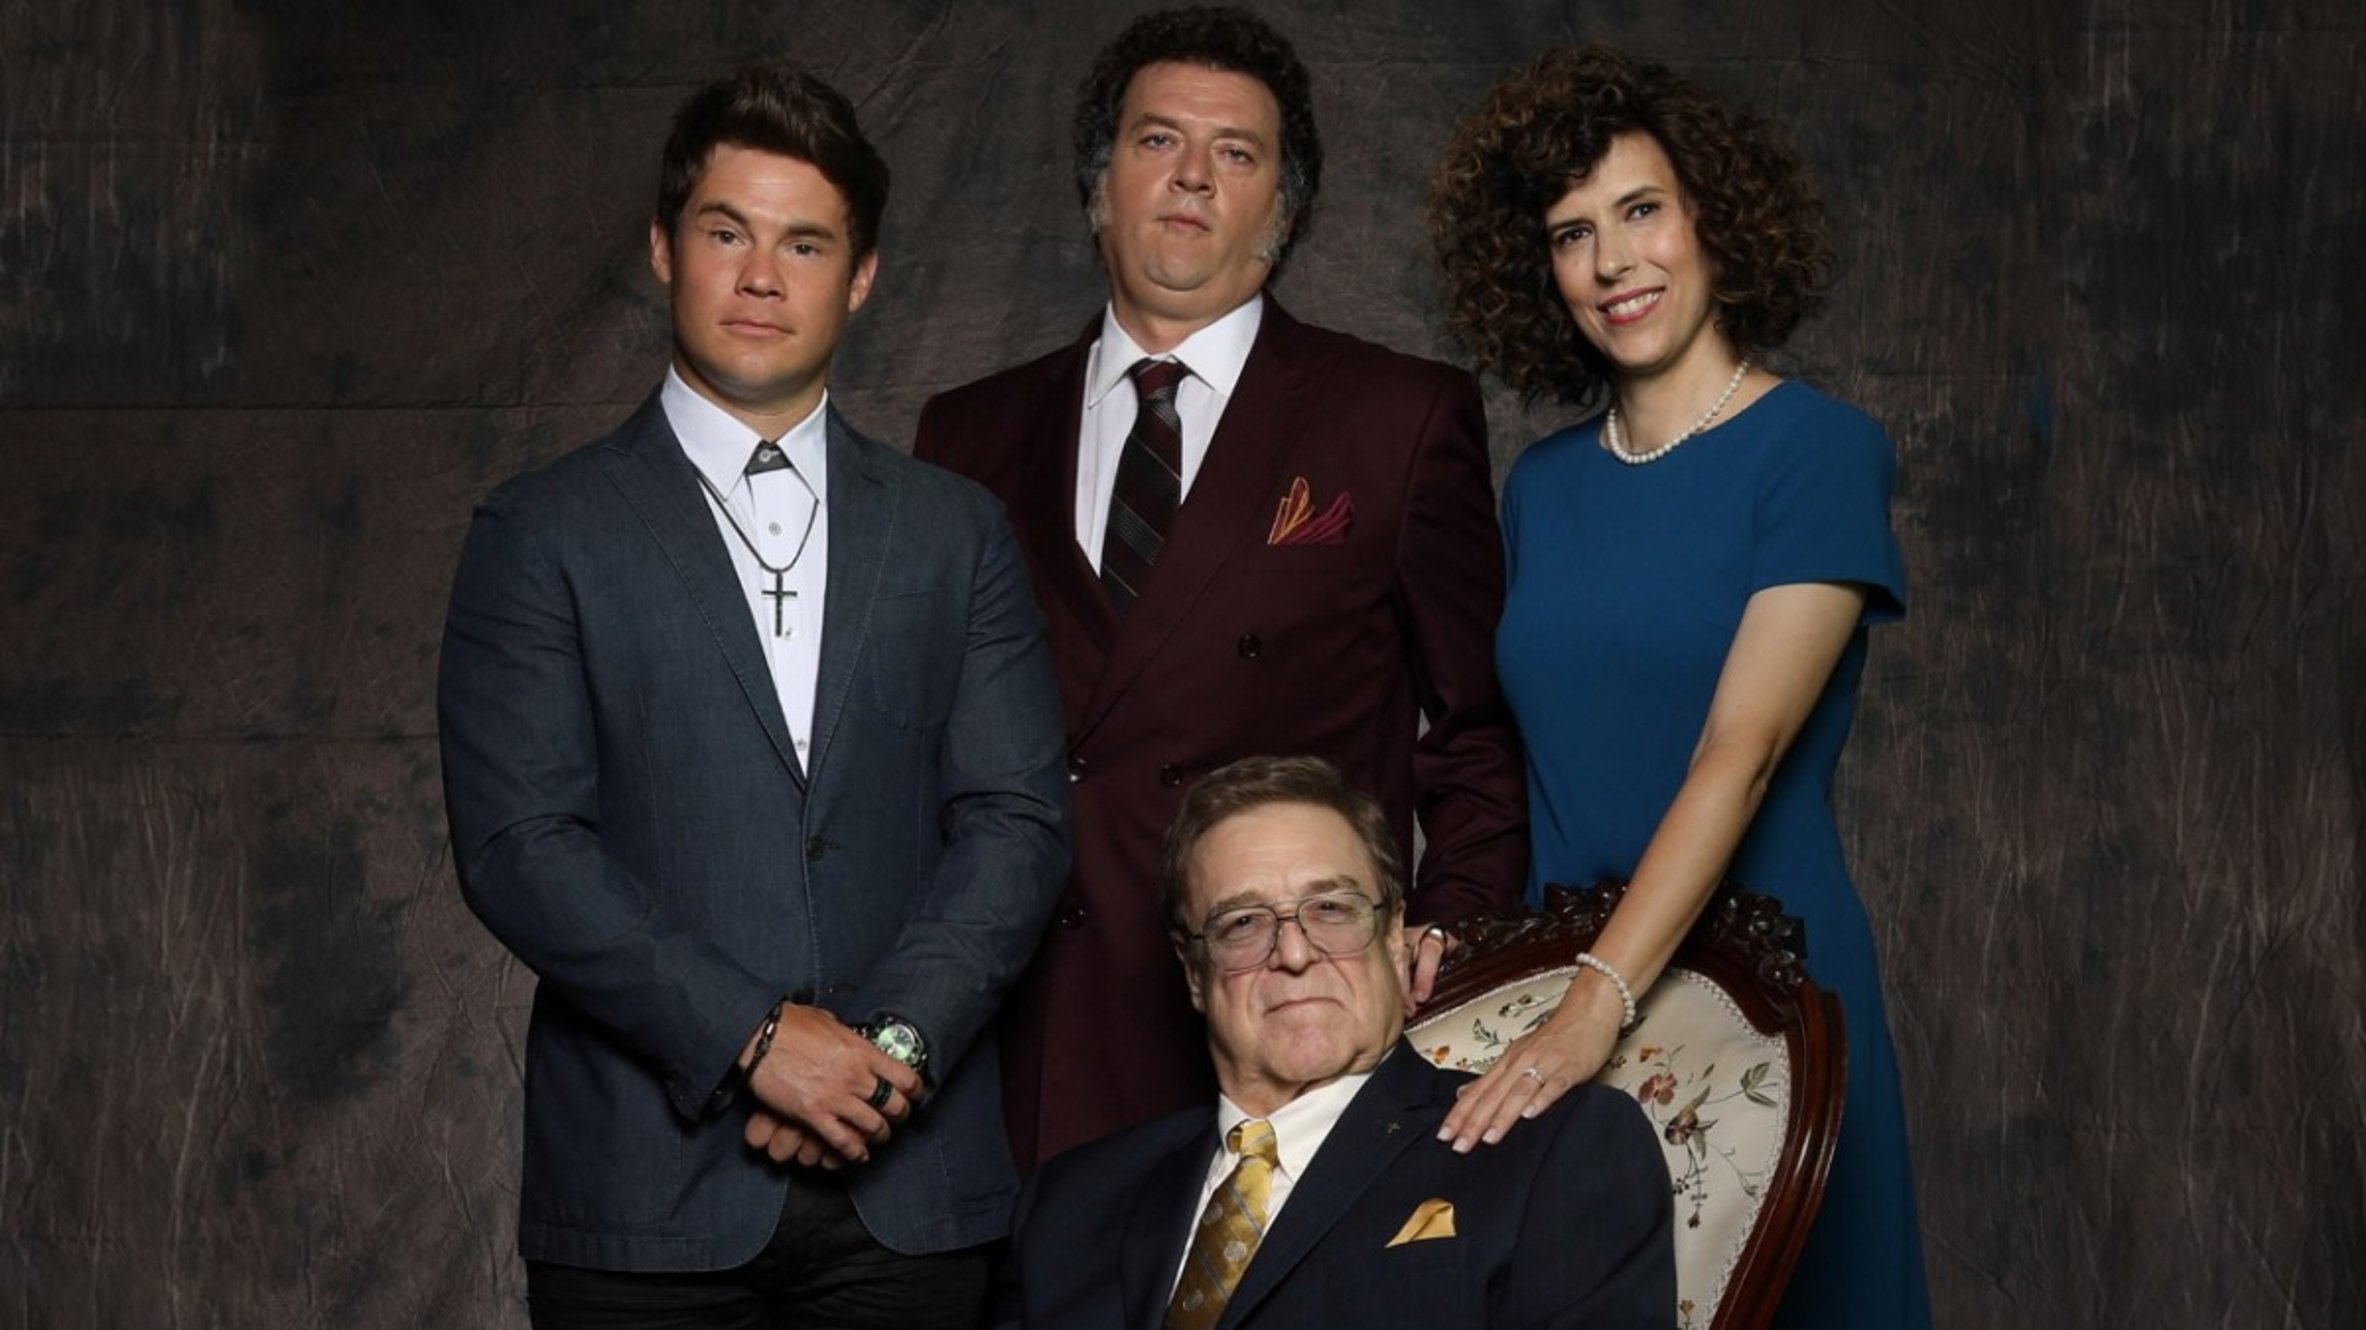 Casting the HBO TV series The Righteous Gemstones!